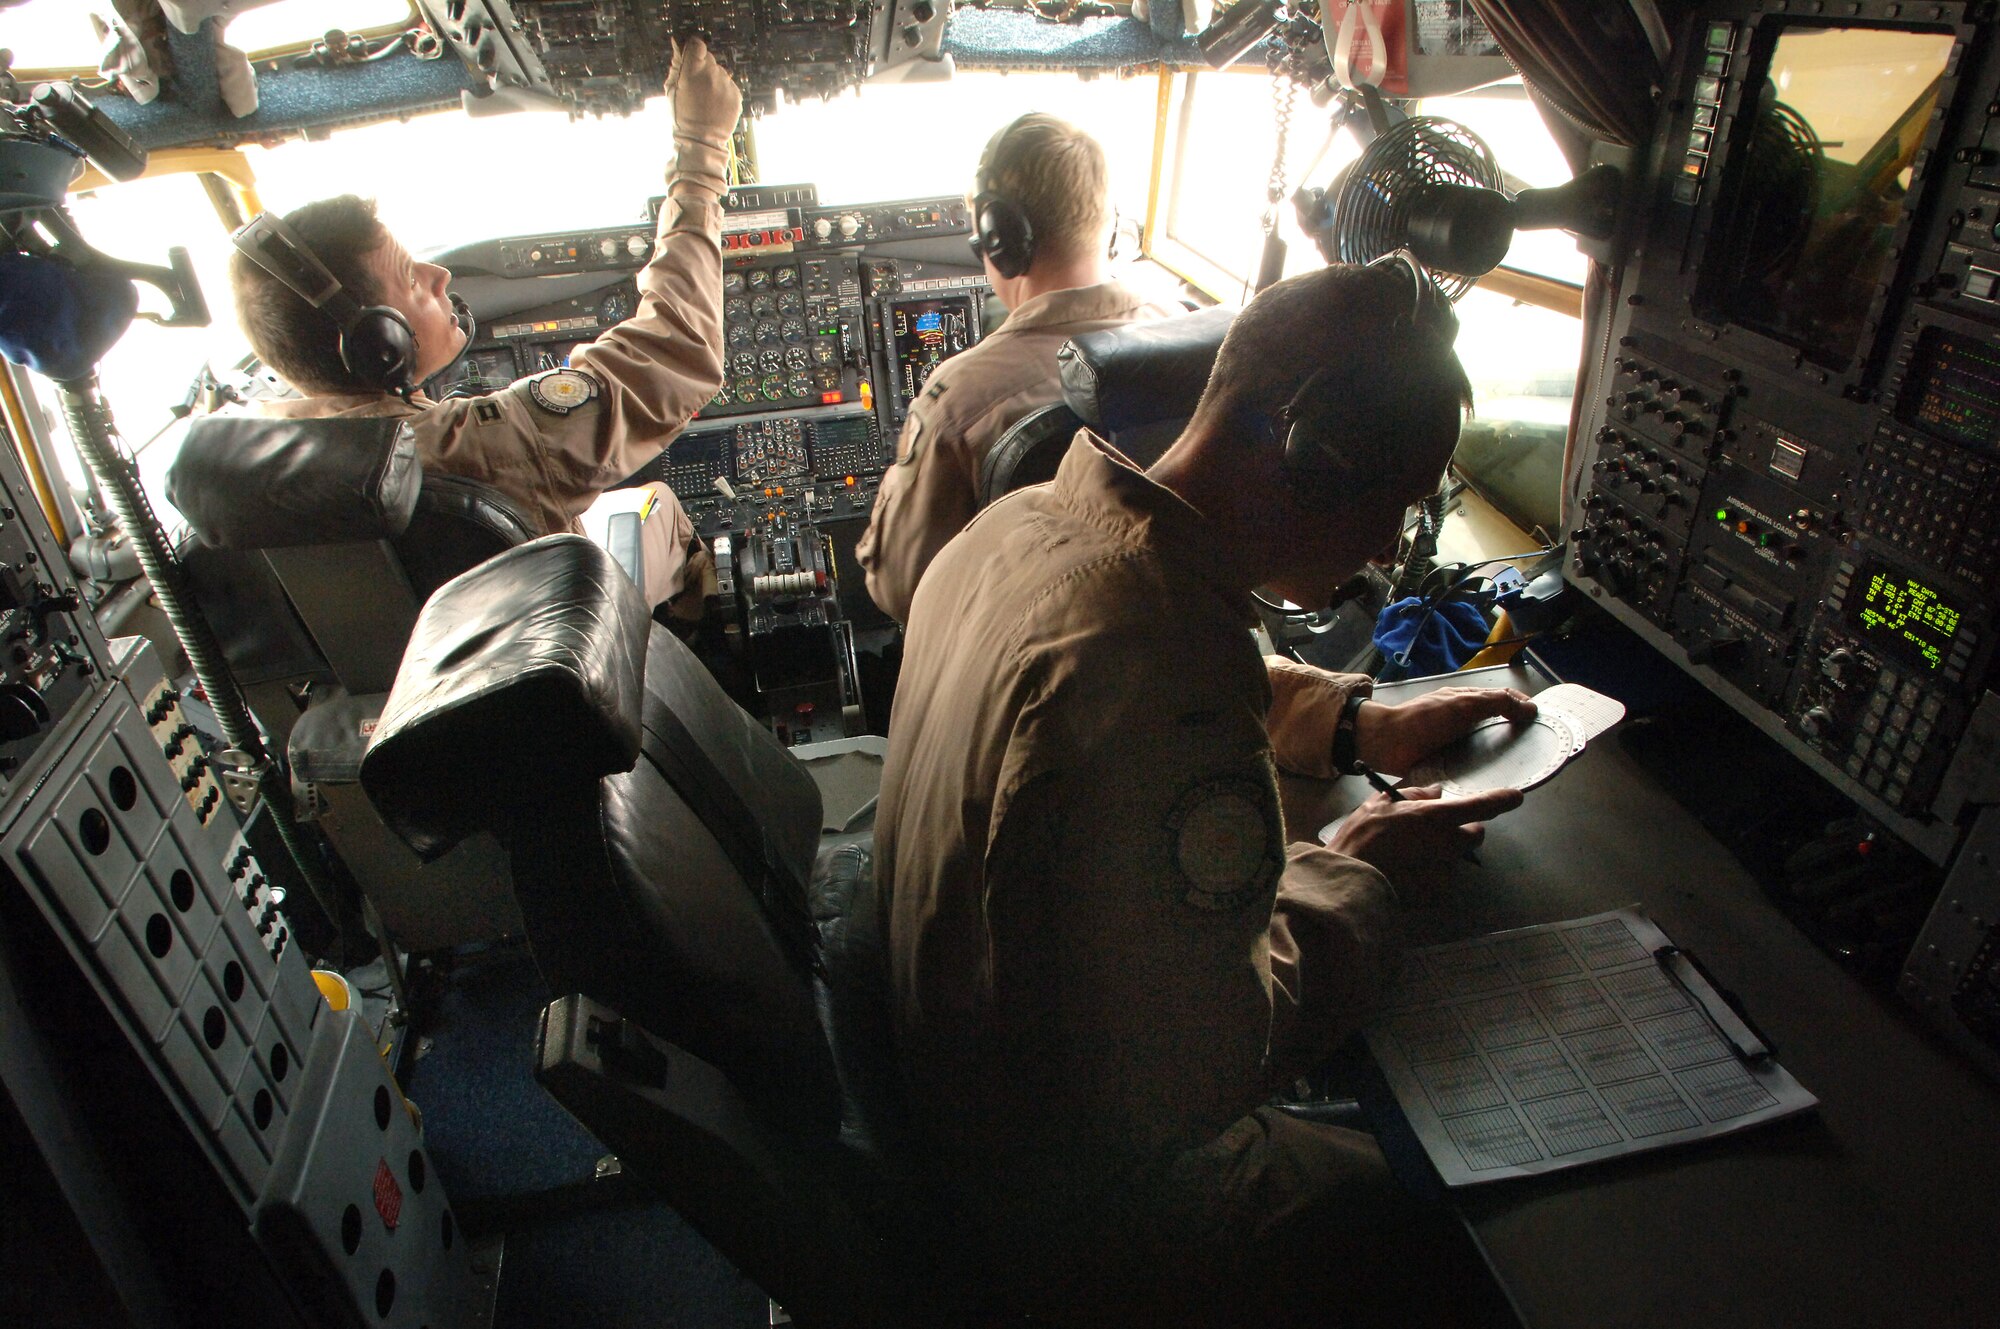 Captains Guy Perrow and Erik Dunkley and 1st Lt. Michael Morrison prep a RC-135 Rivet Joint for a flight. RC-135's have been deployed from the 55th Wing at Offutt Air Force Base, Neb., and maintained a constant presence in Southwest Asia for 6,000 days since Aug. 9, 1990, just prior to Operation Desert Shield. Captain Perrow is the aircraft commander, Captain Dunkley is the co-pilot, and Lieutenant Morrison is the navigator. (U.S. Air Force photo/Master Sgt. Scott Wagers)